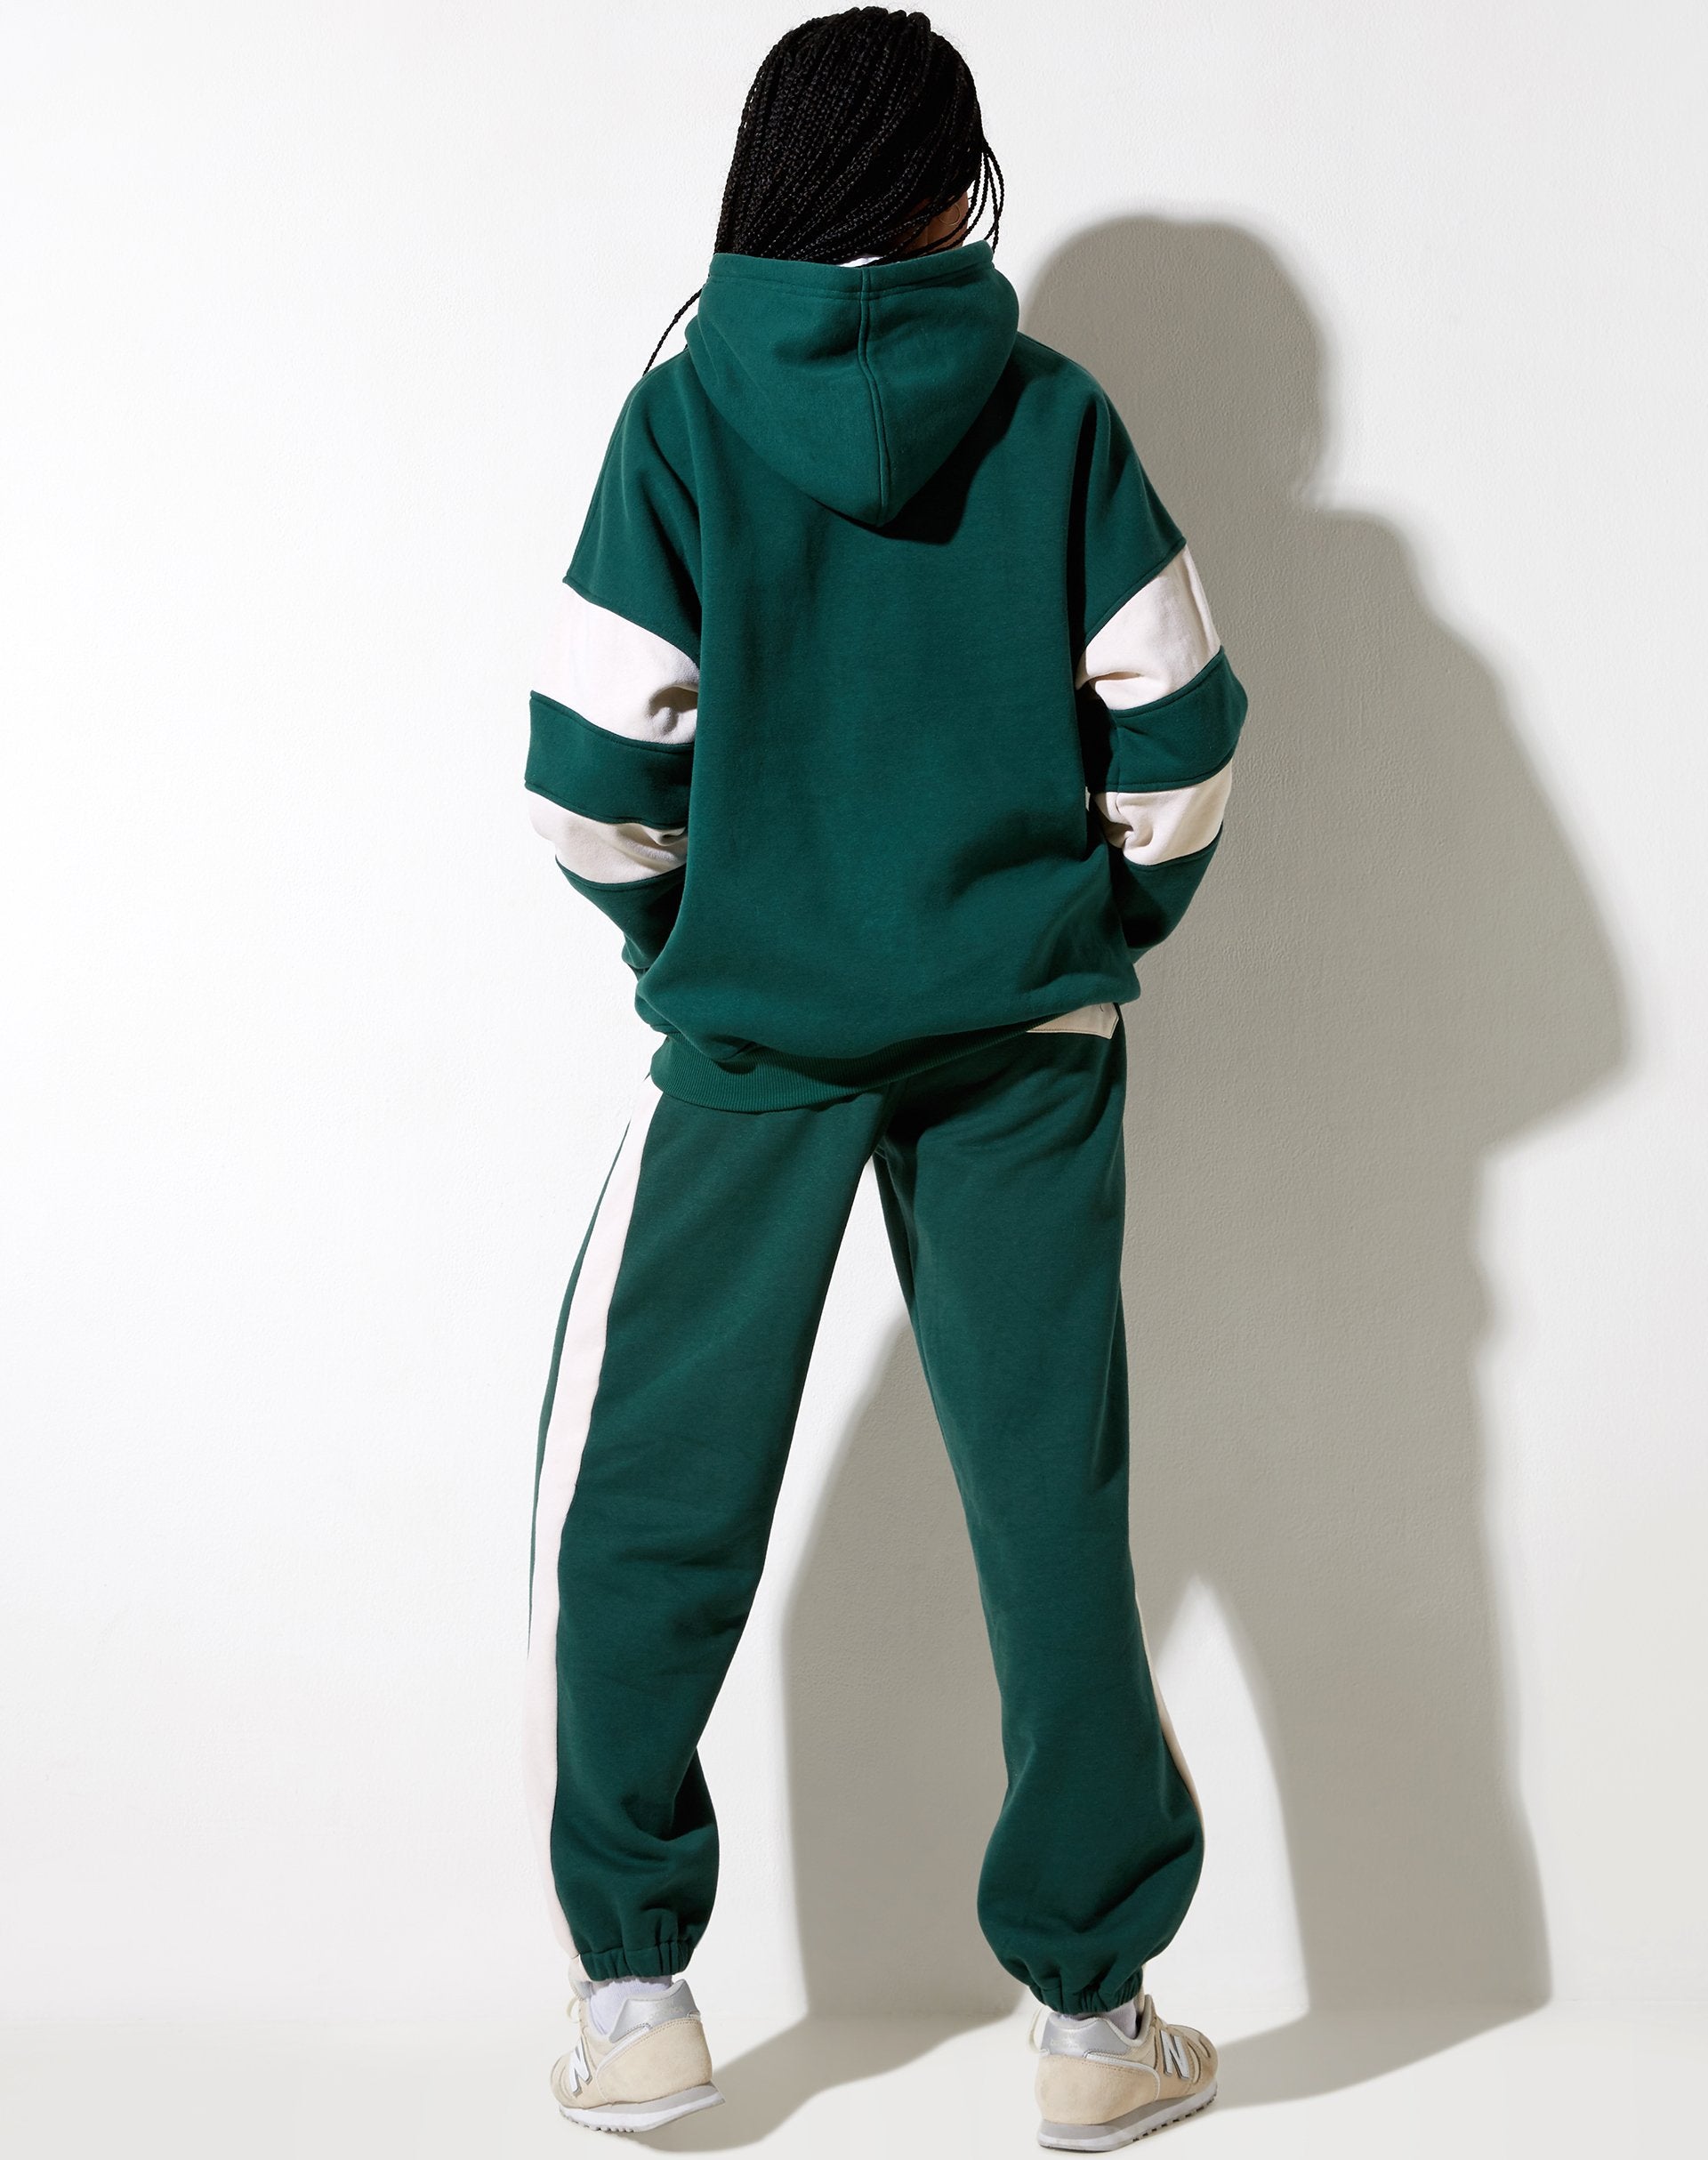 Image of Mora Hoodie in Forest Green and Winter White Sporting Club Mix Embro